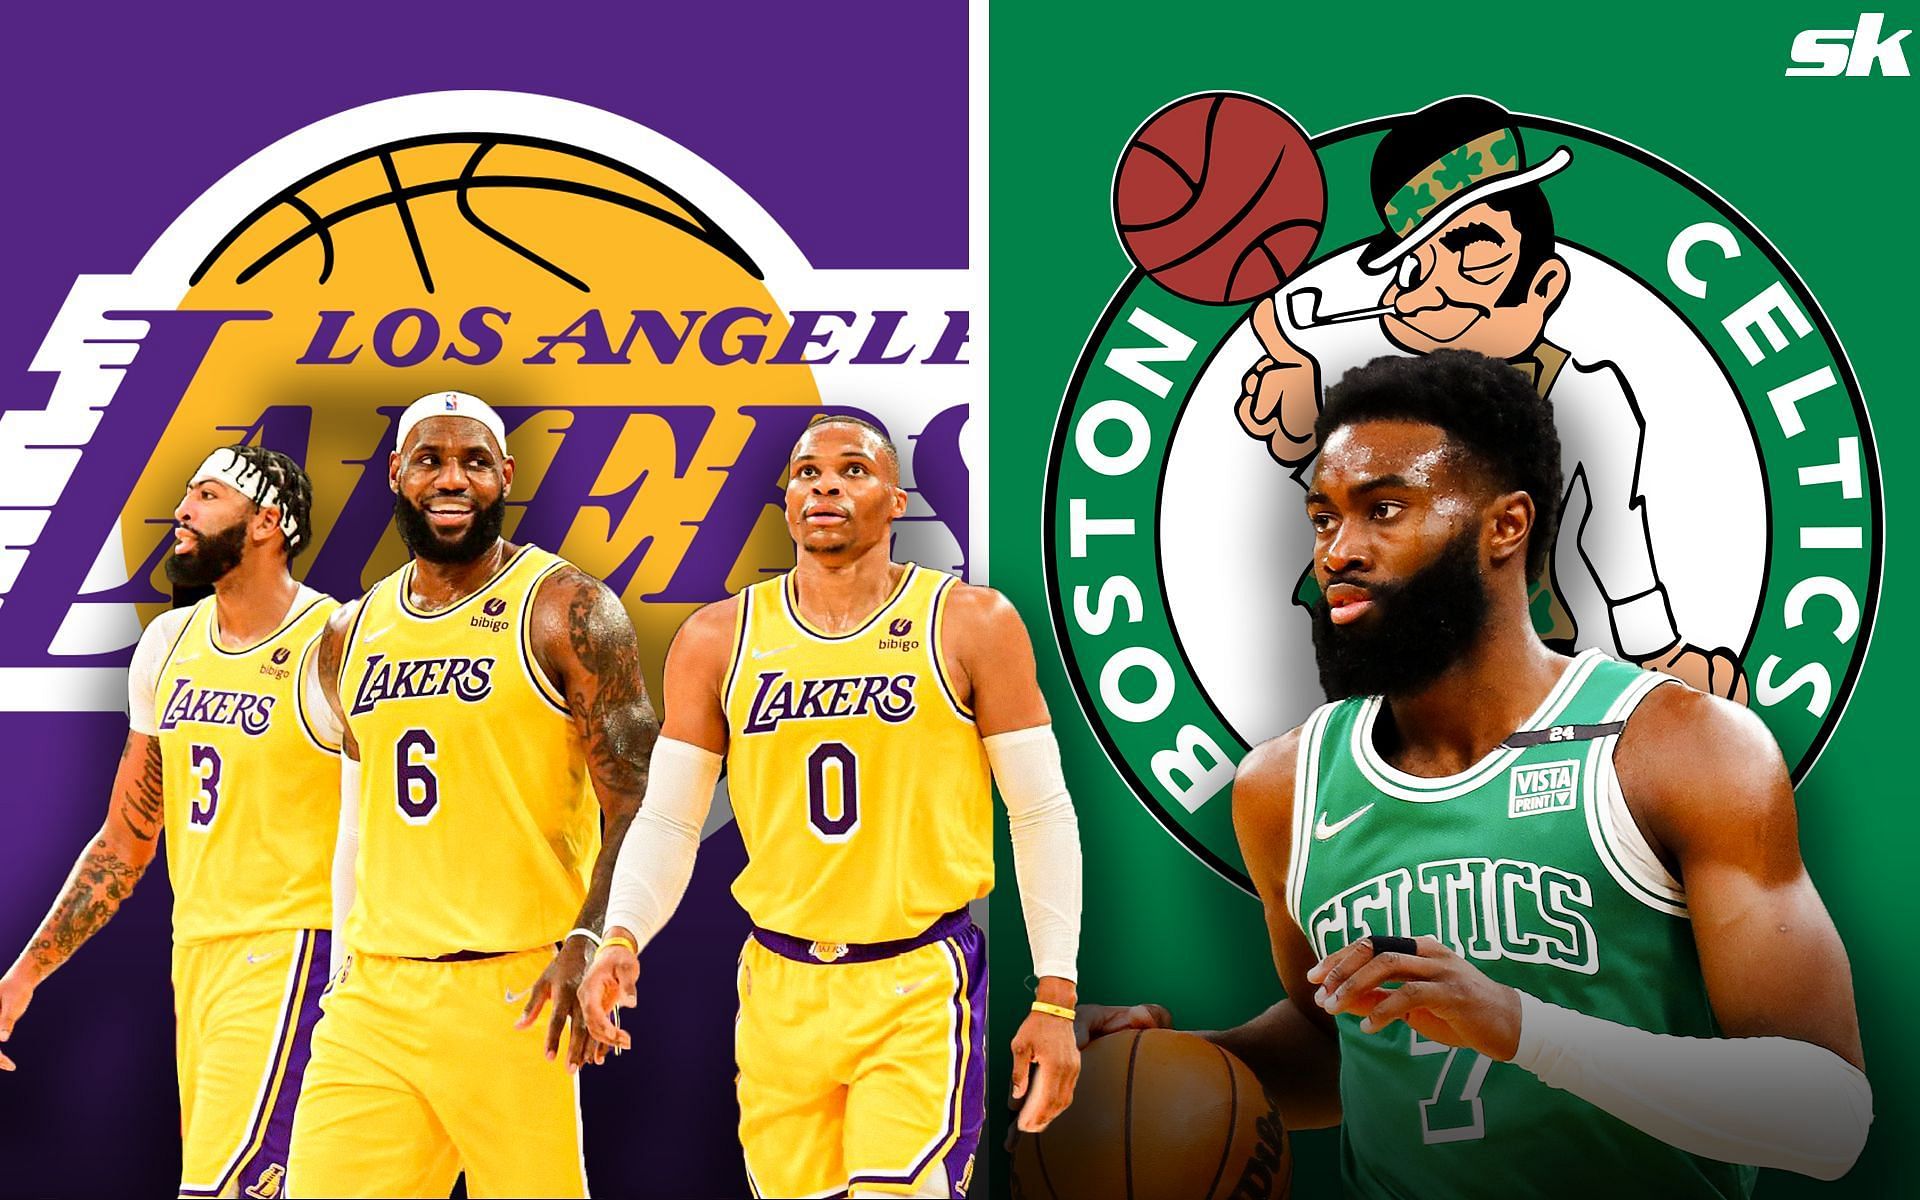 Can the LA Lakers and the Celtics strike up a deal?